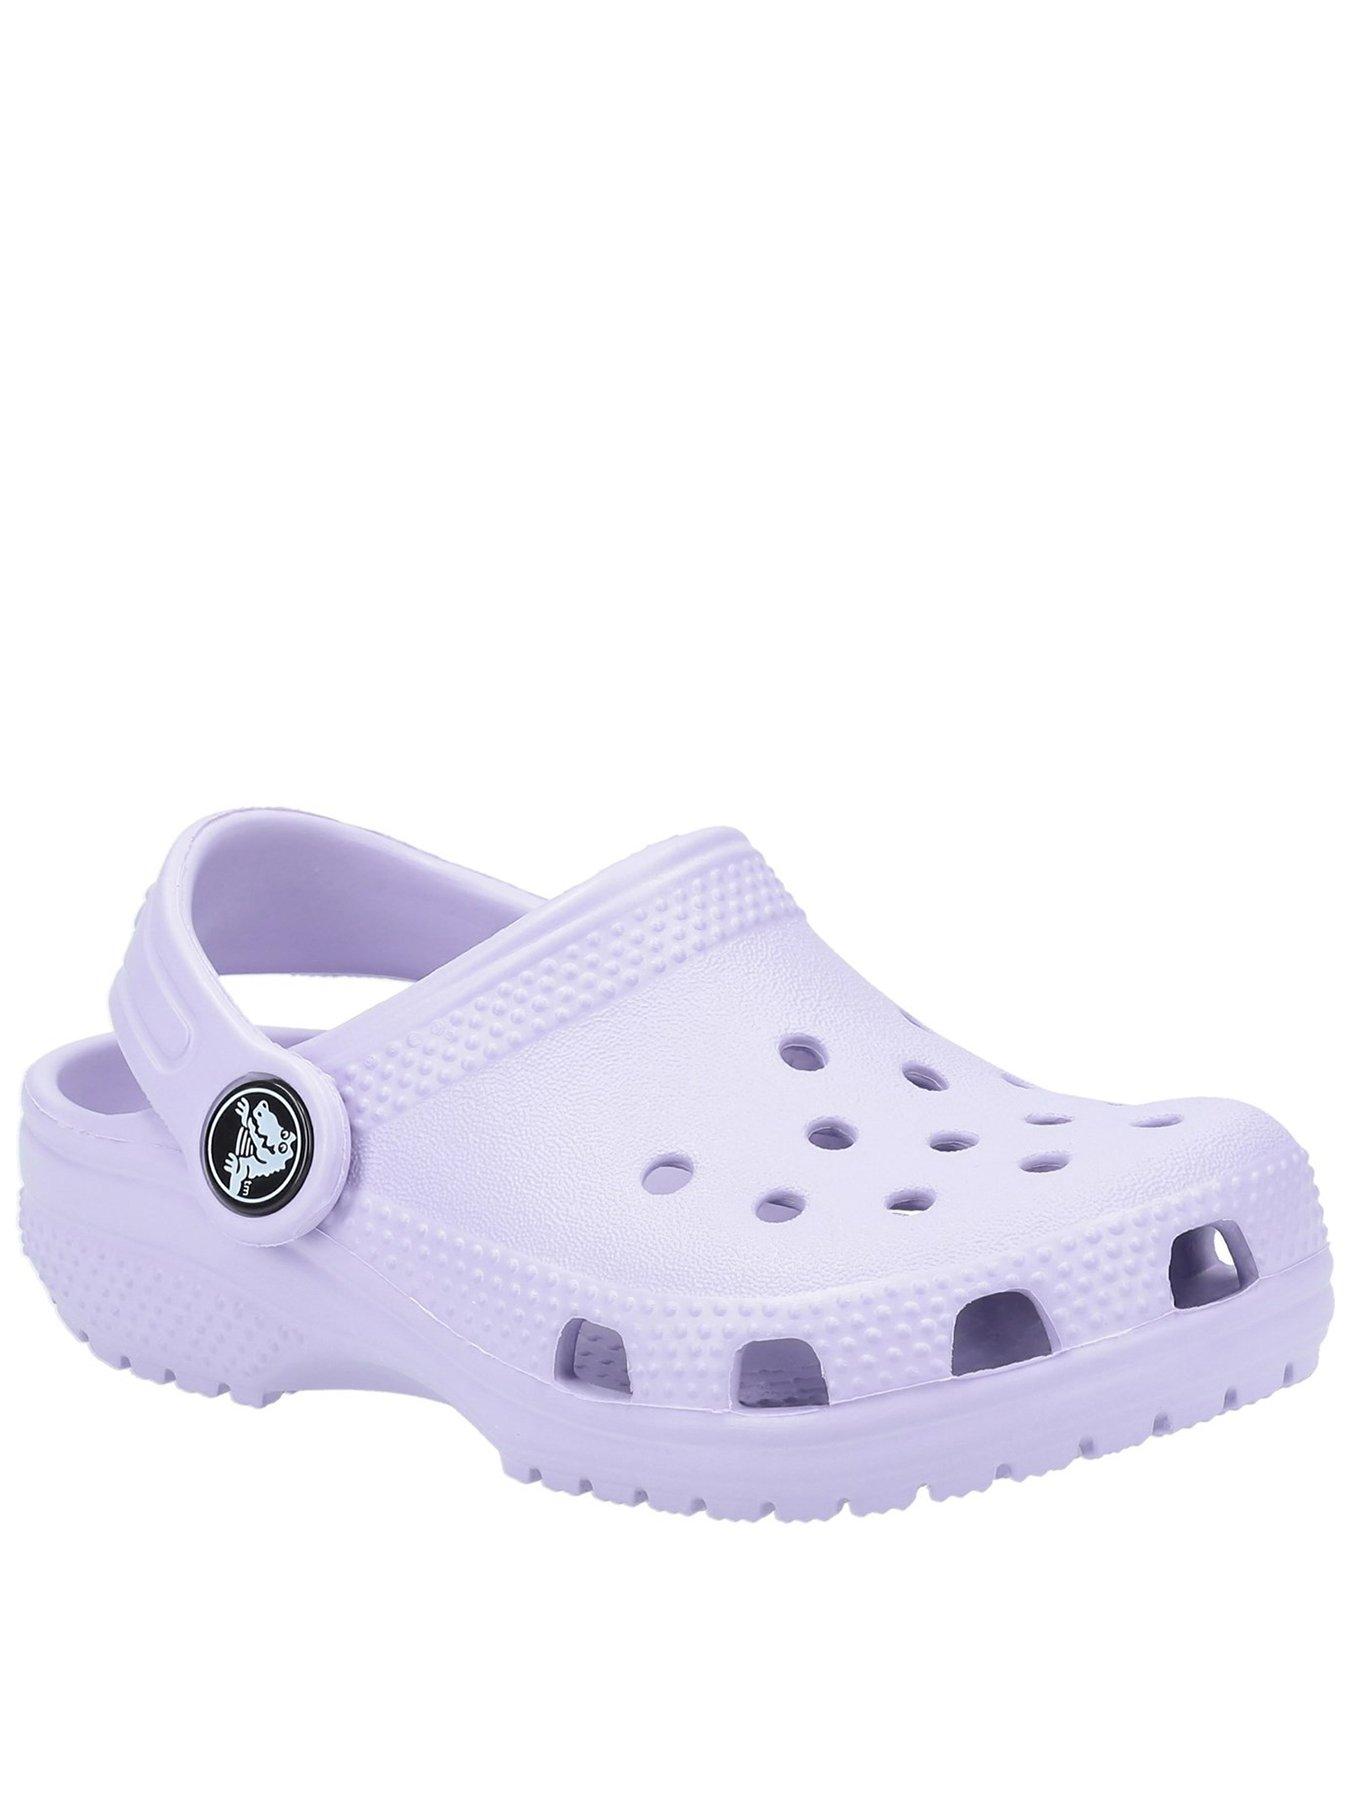 crocs for girls size 3